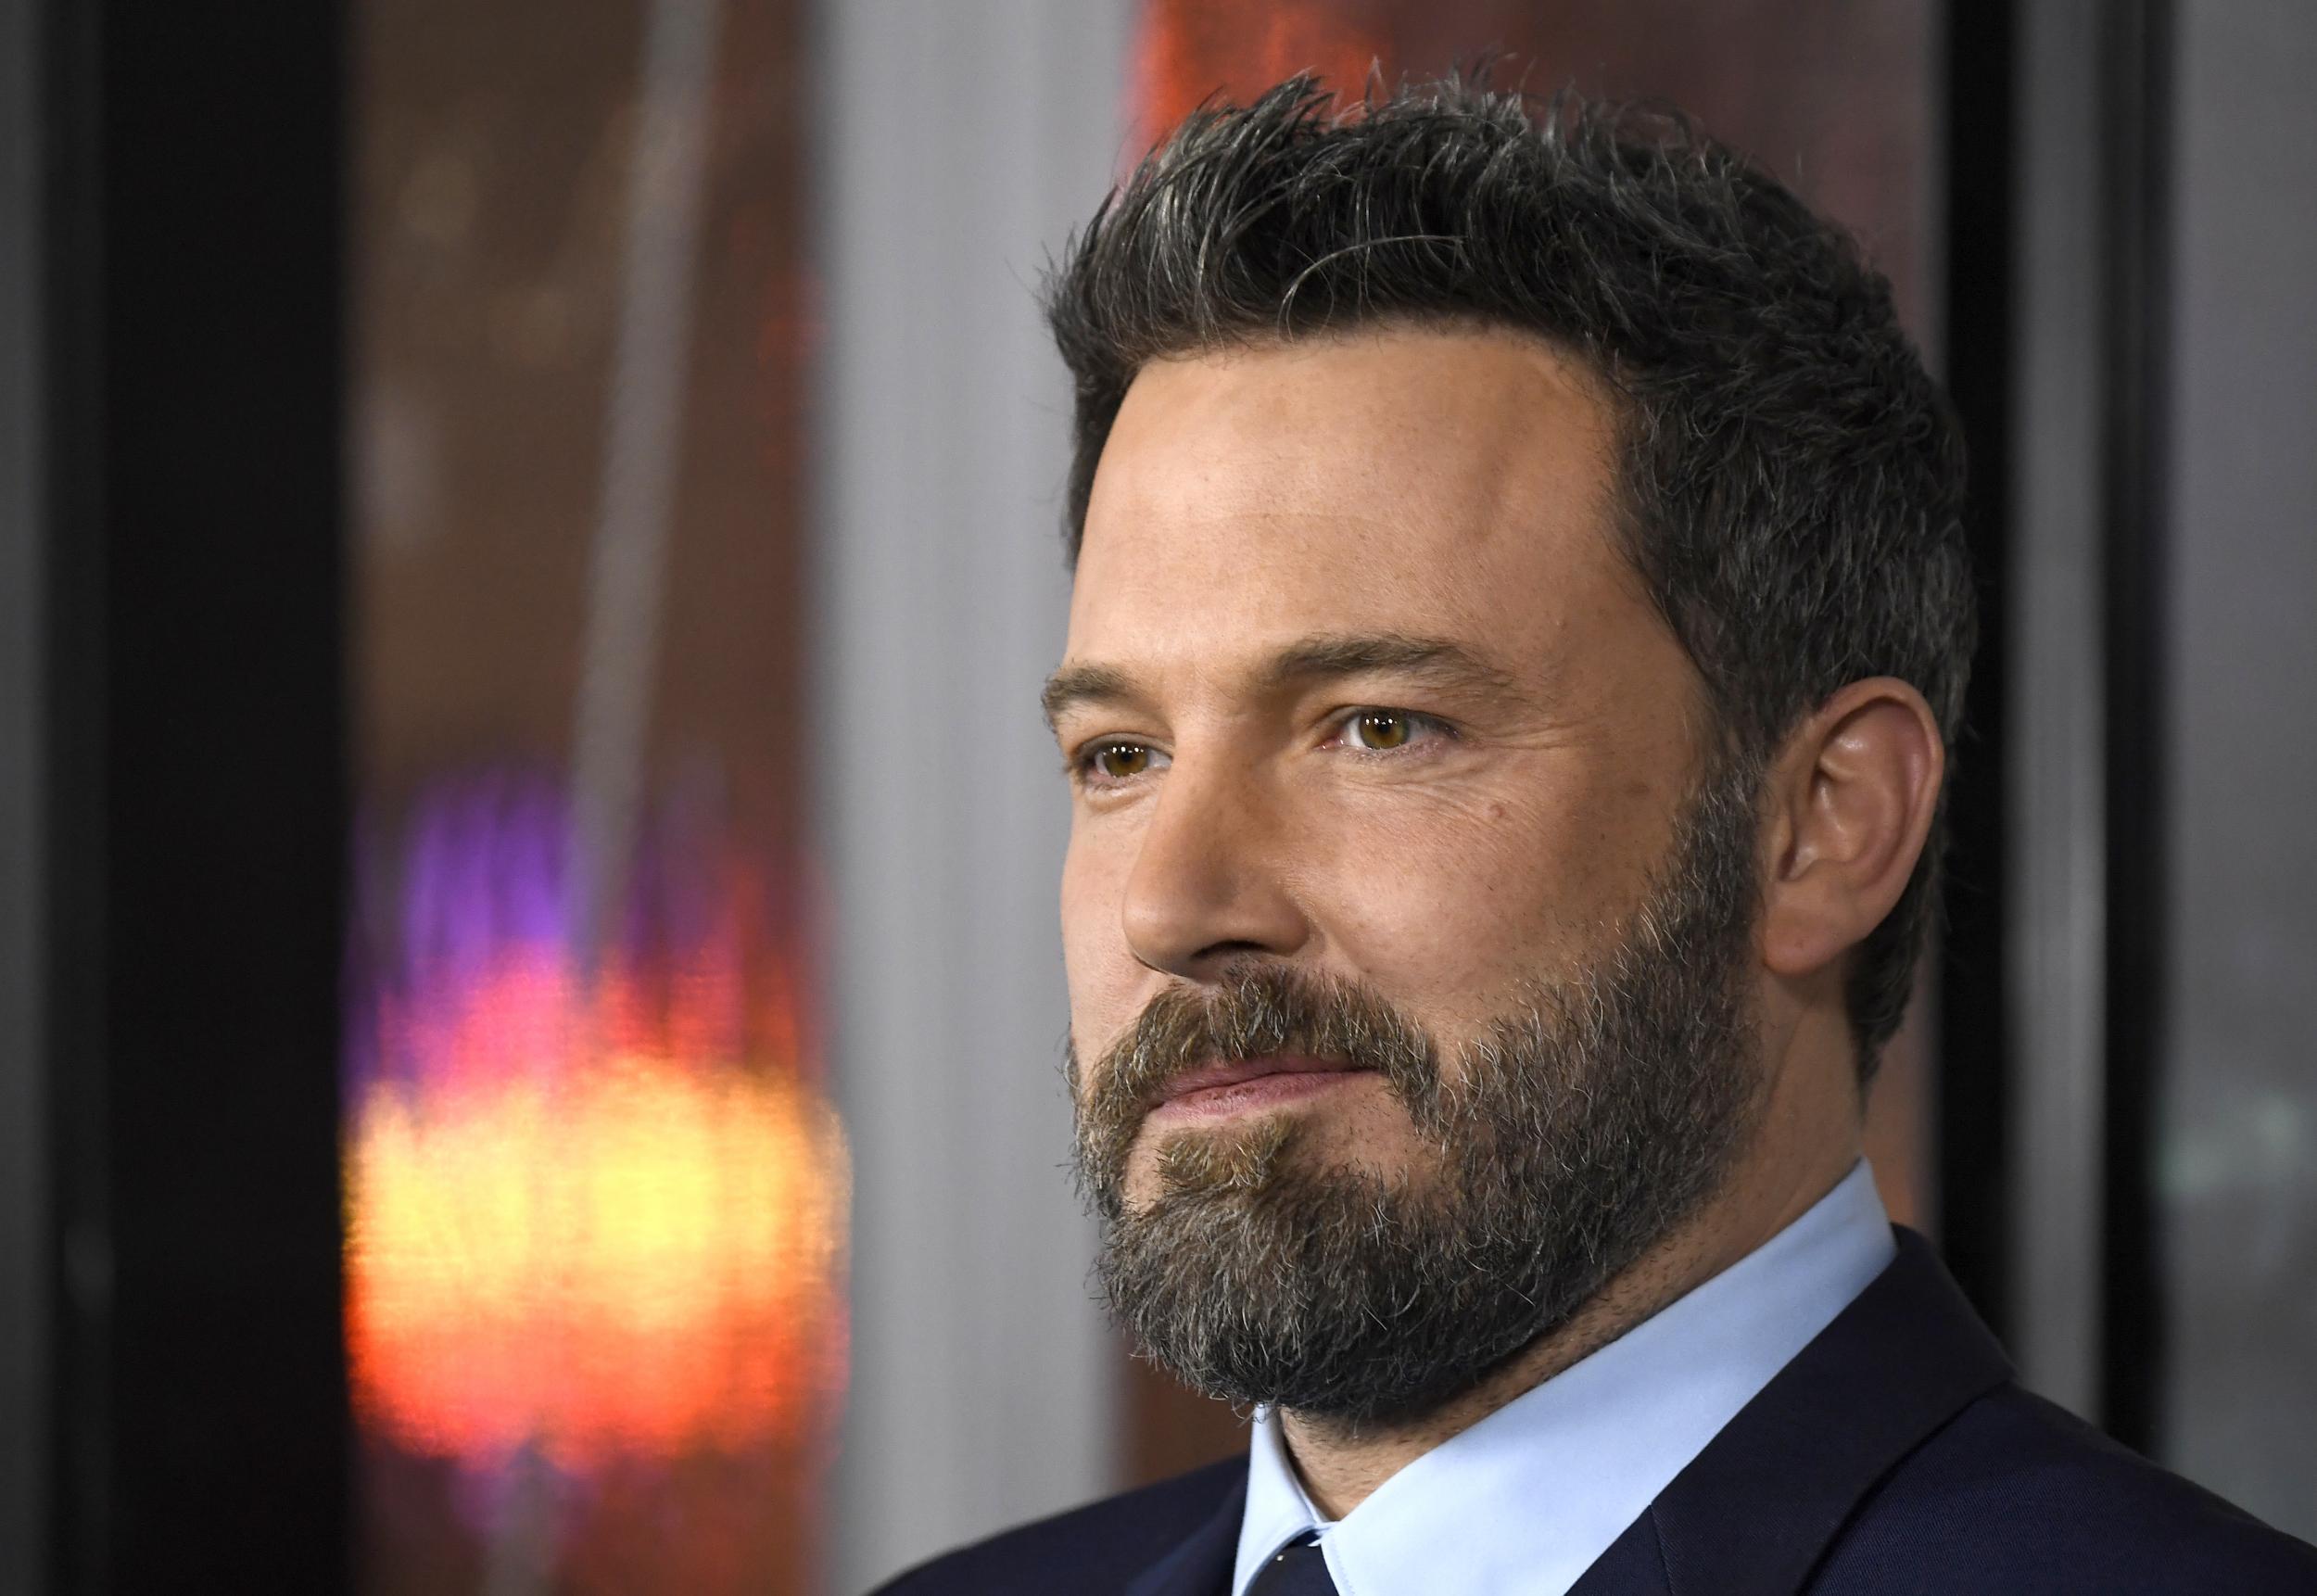 Ben Affleck was reportedly dropped off at a rehab clinic this week by his ex-wife Jennifer Garner, having struggled with alcohol dependency in the past